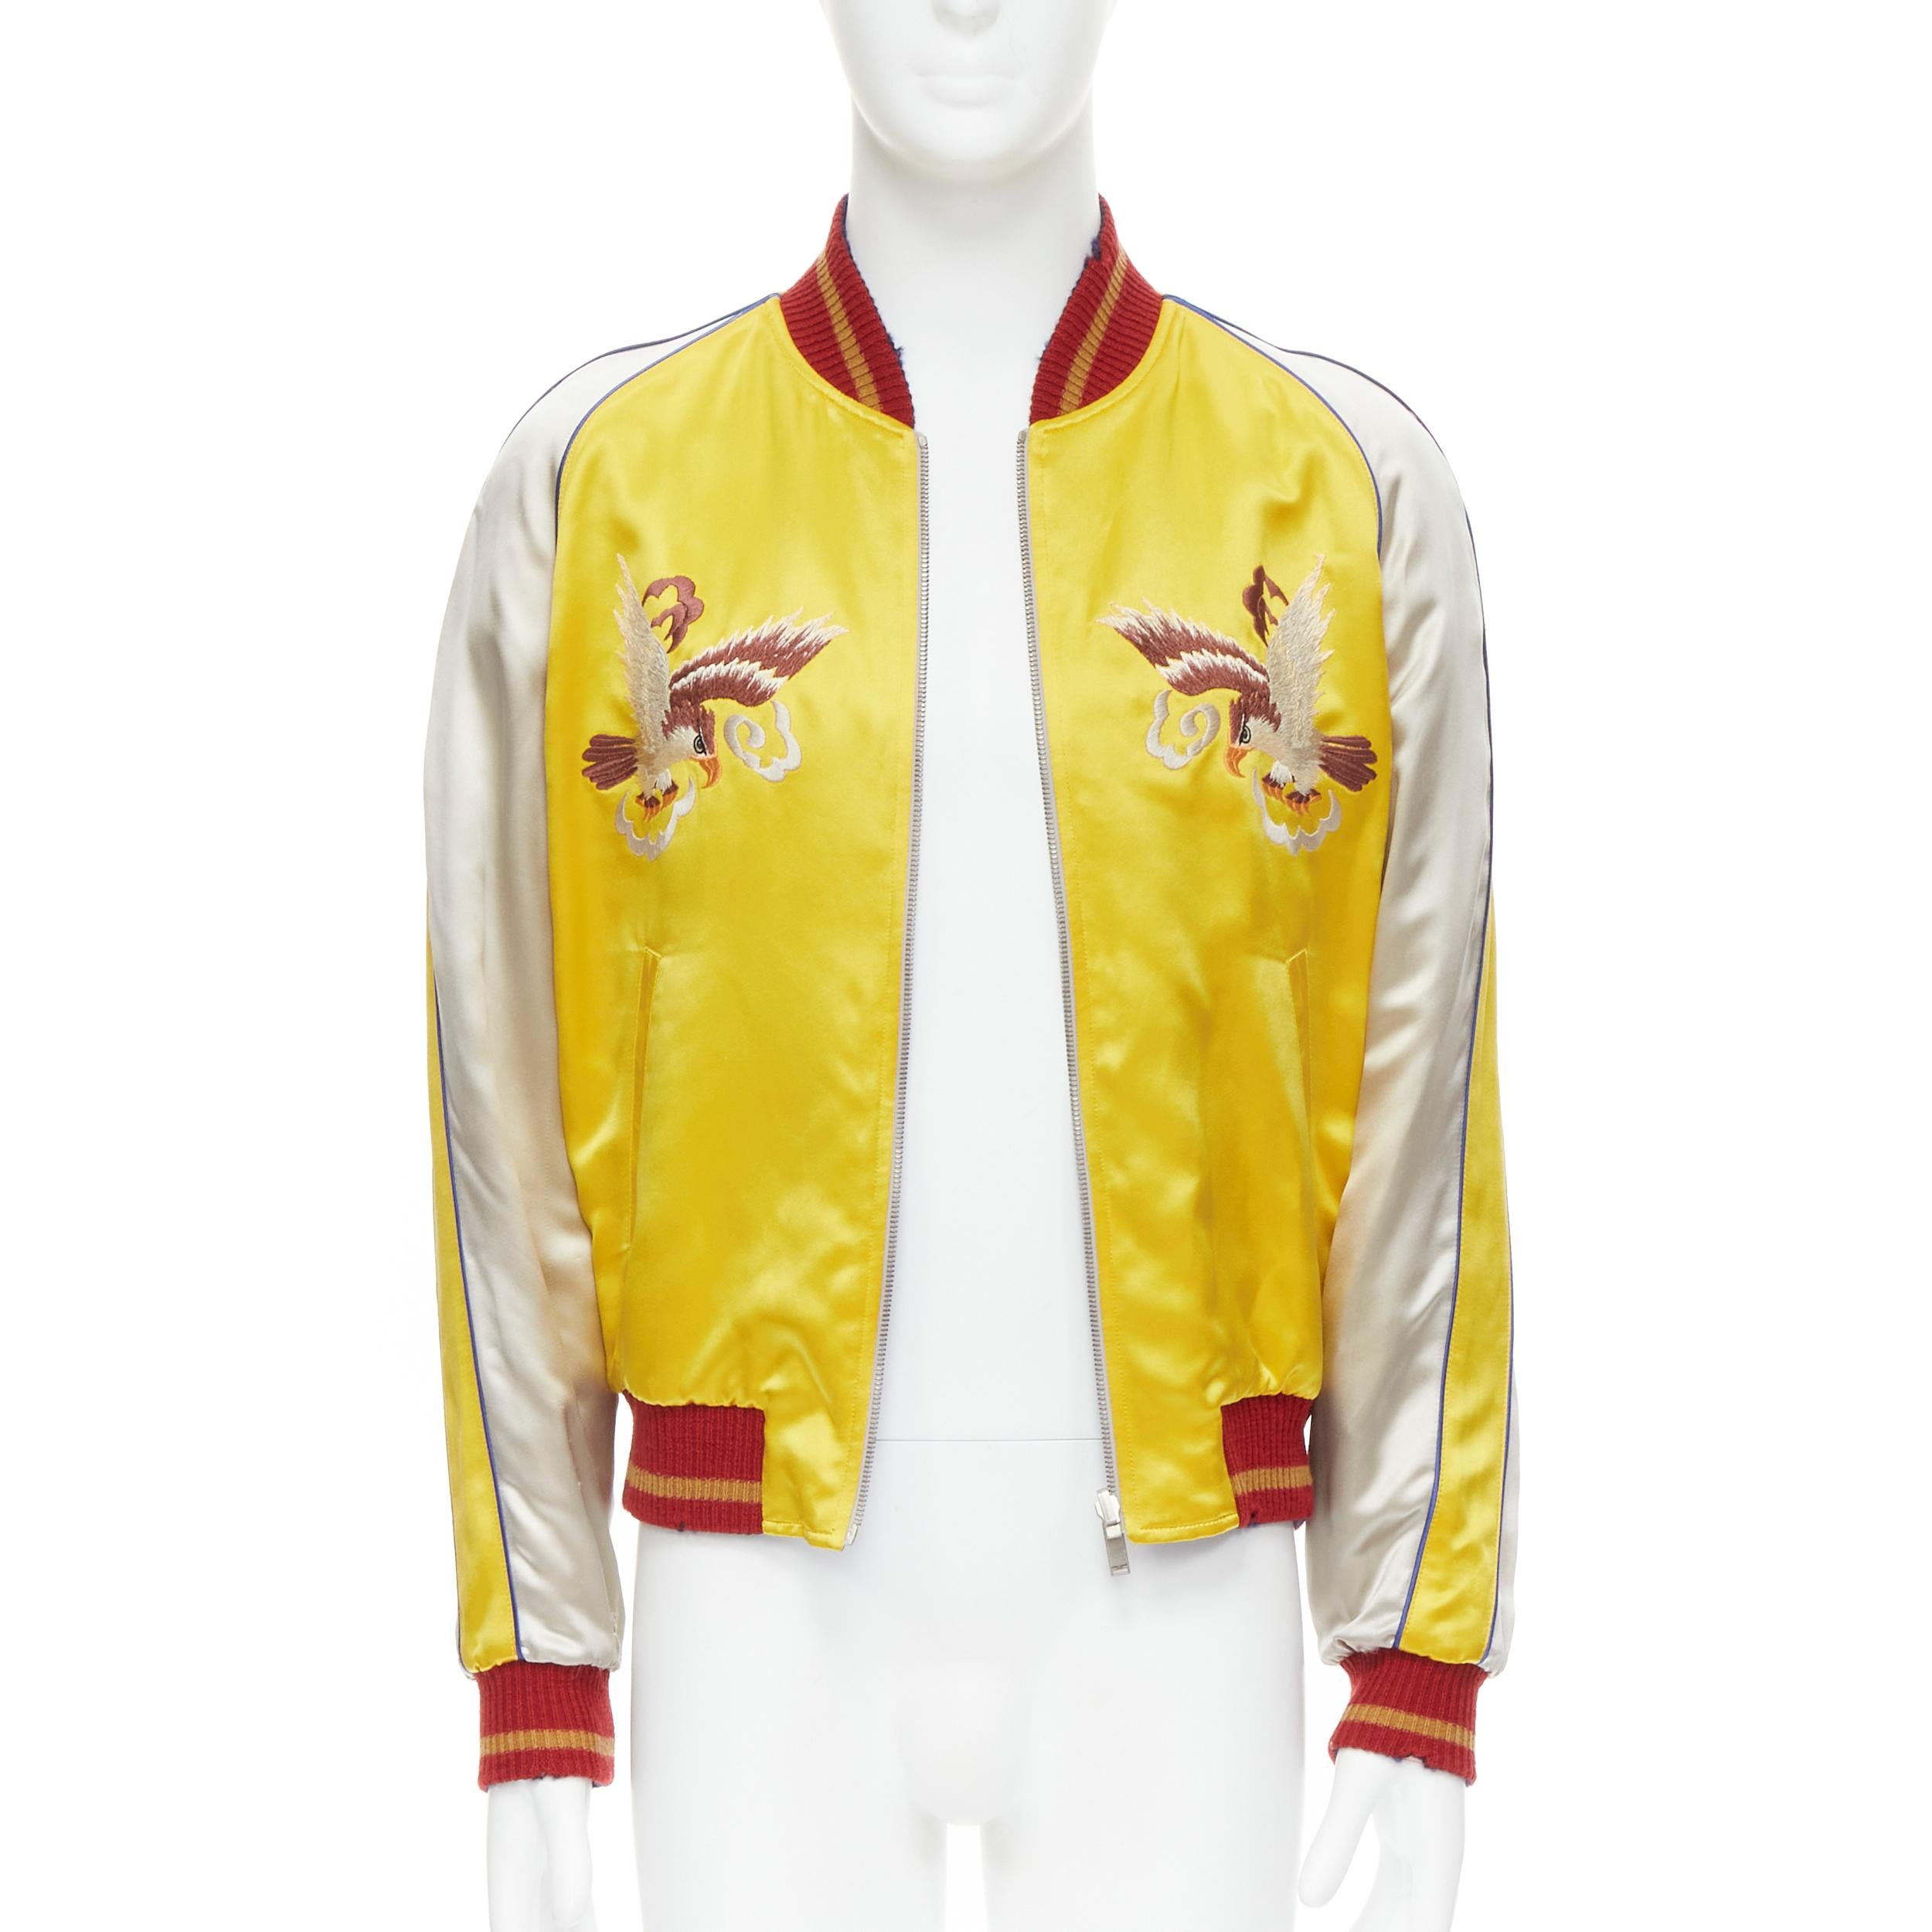 new SAINT LAURENT 2018 Reversible yellow blue satin bird embroidery bomber EU50 
Reference: TGAS/B01681 
Brand: Saint Laurent 
Collection: 2018 Runway 
Material: Viscose 
Color: Yellow 
Pattern: Solid 
Closure: Zip 
Extra Detail: Signature Saint